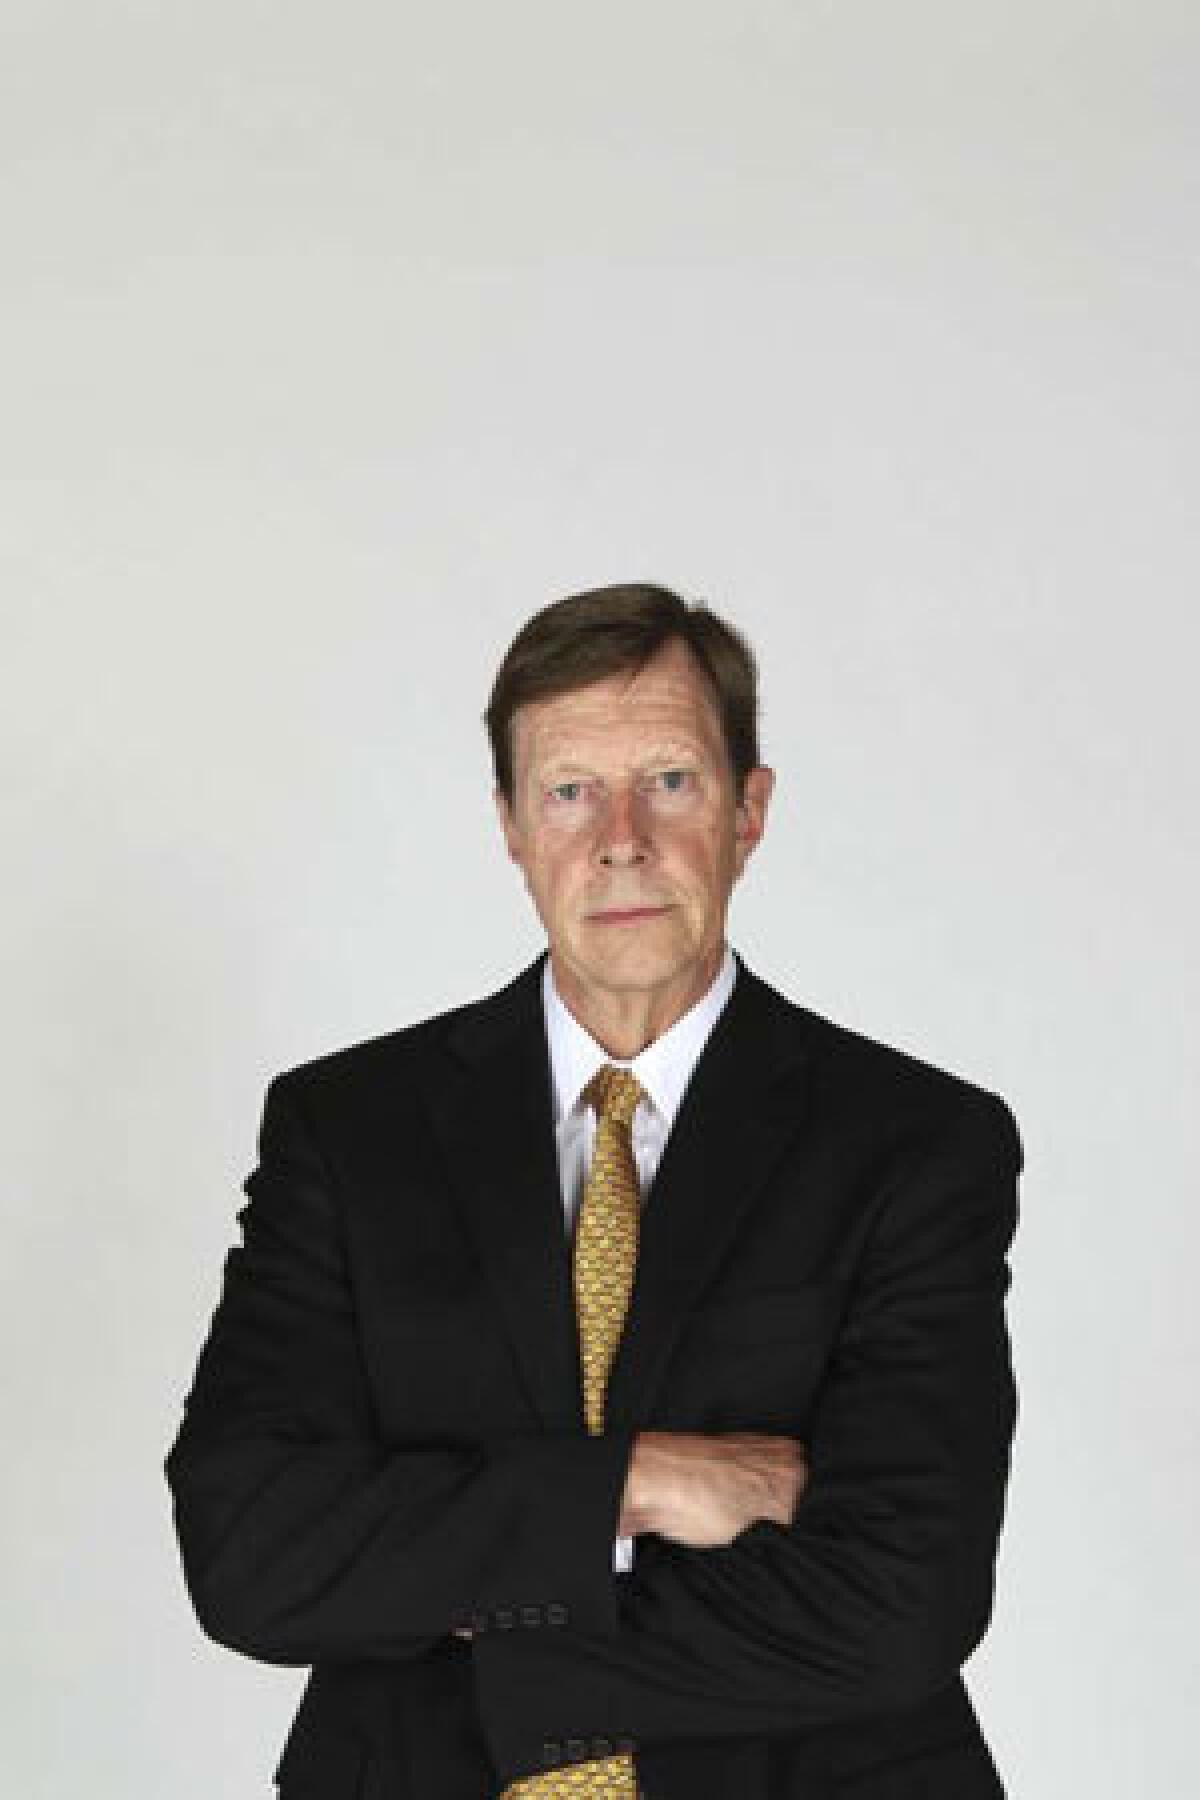 David Poile, shown in a file photo, was injured when a puck hit him in the face Thursday in St. Paul, Minn.